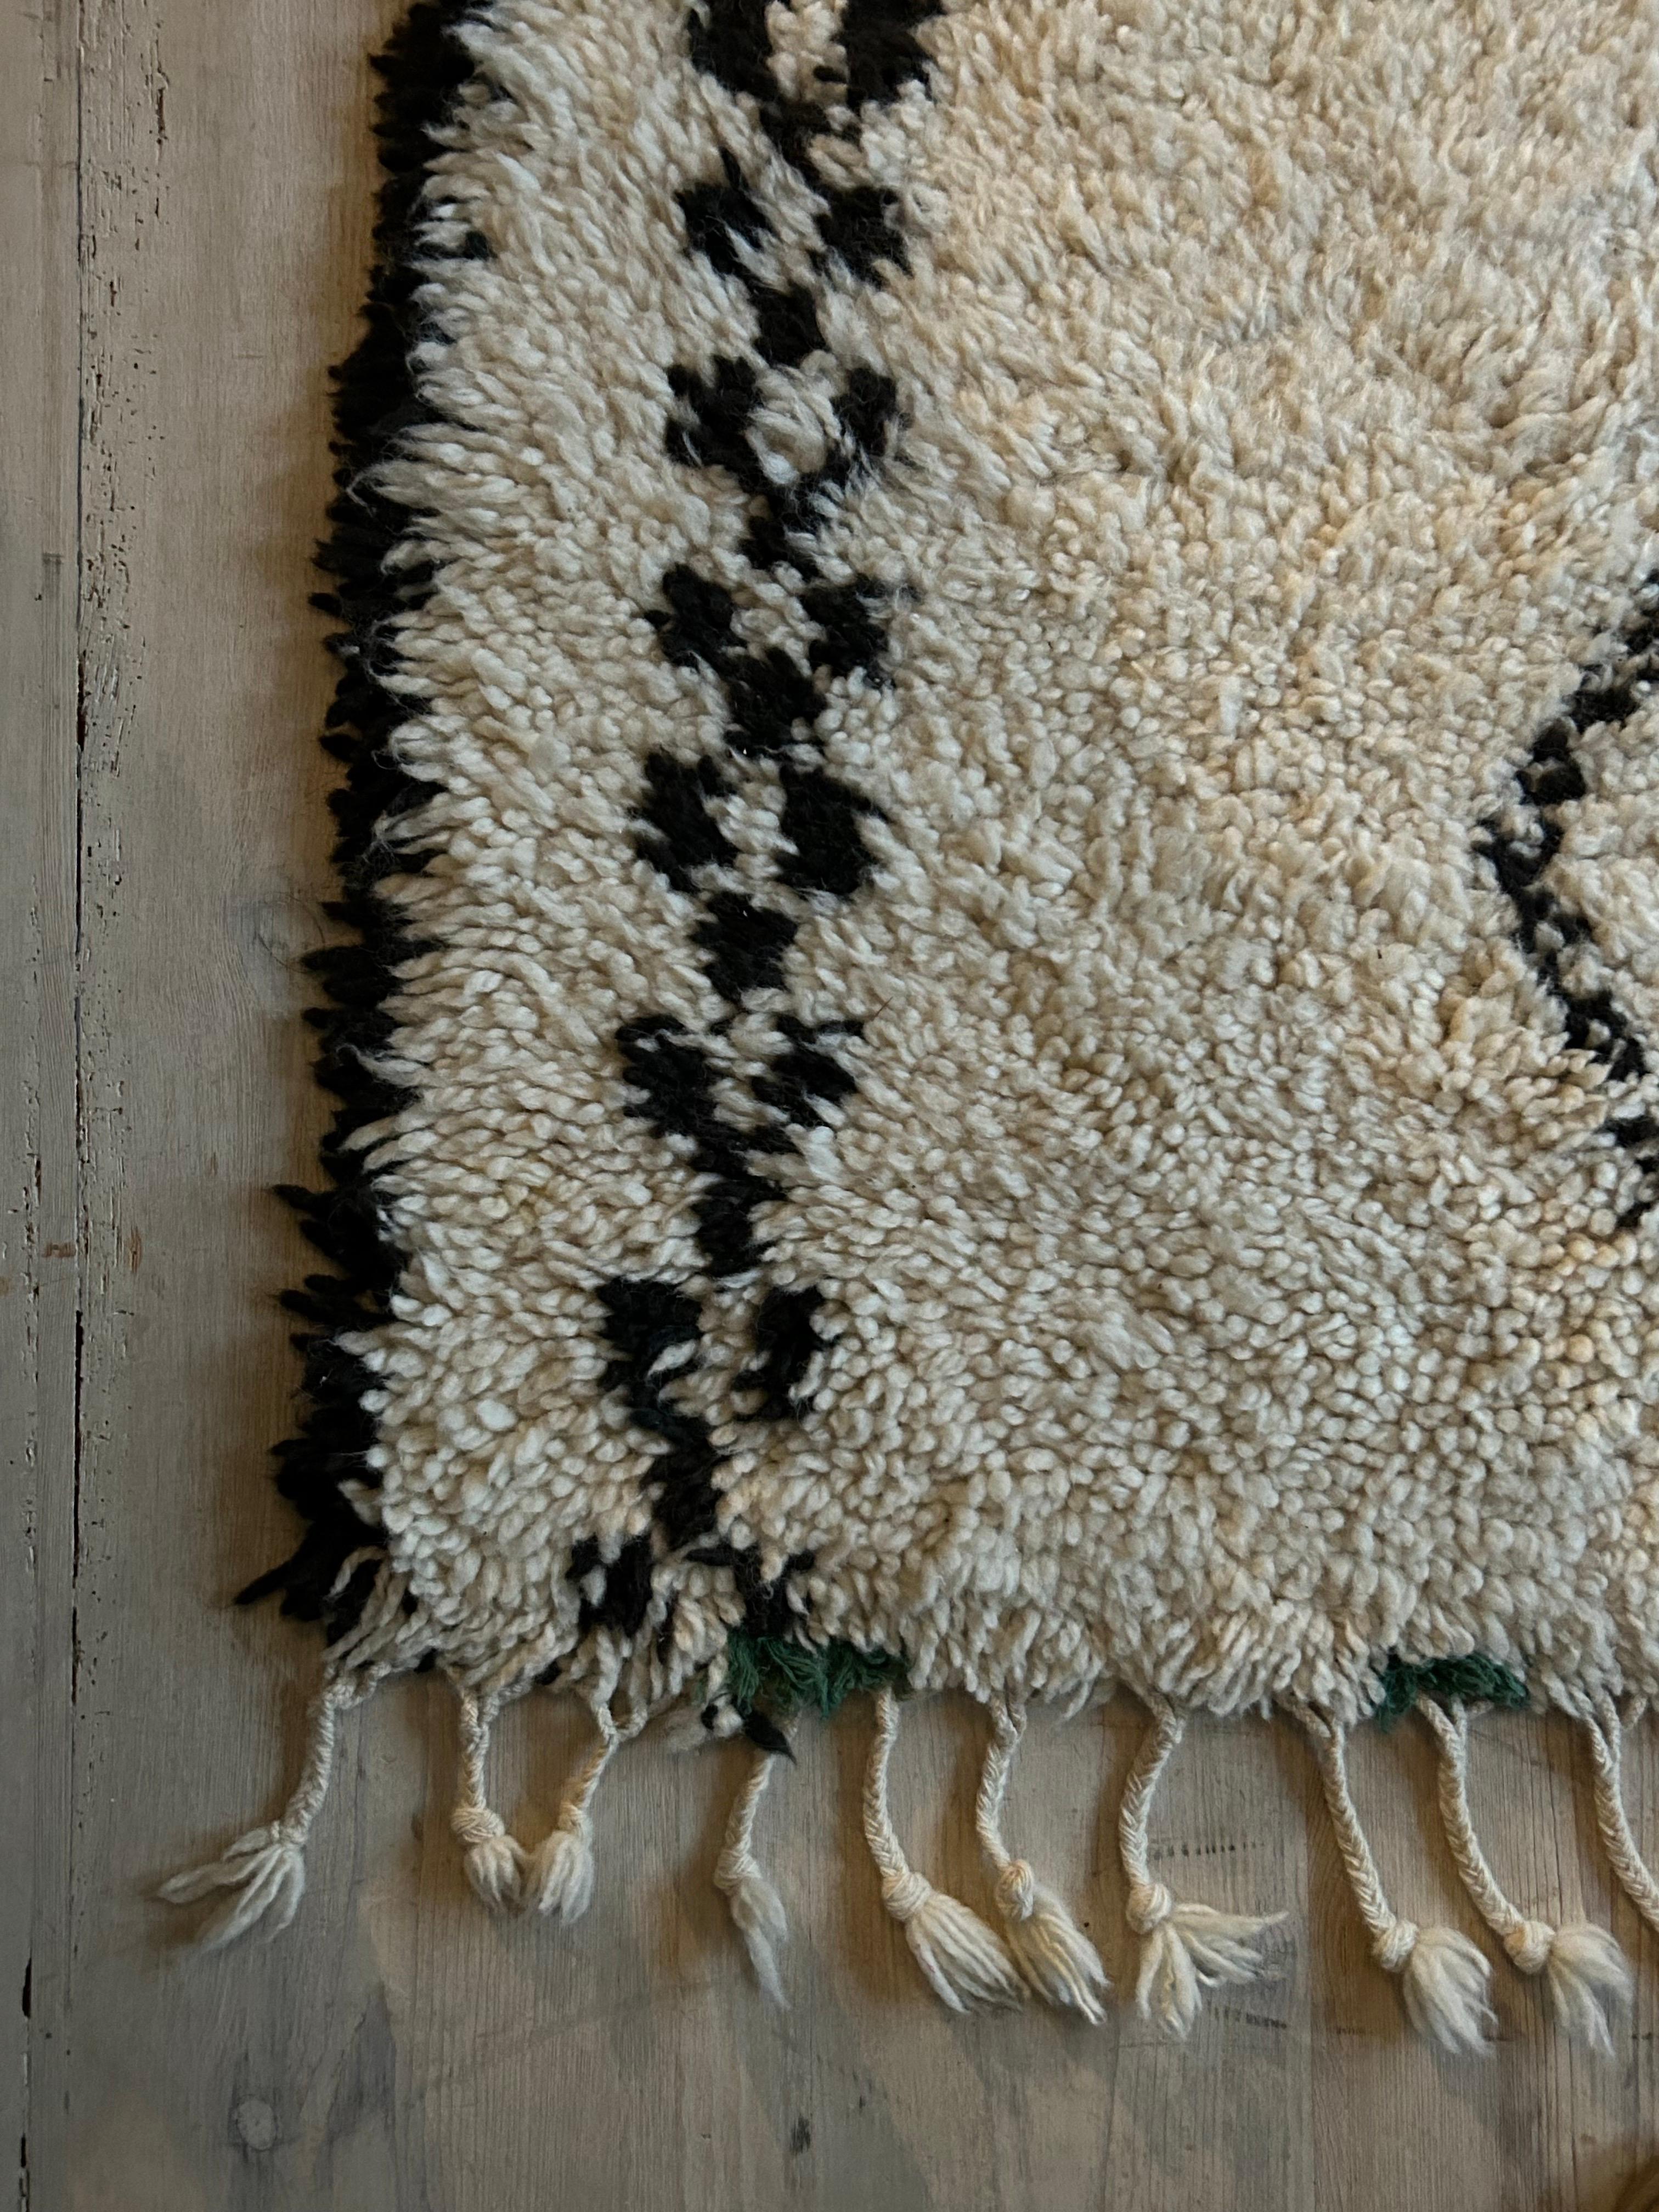 Vintage Beni Ouarain Rug in White with Black Stripes, Morocco, 20th Century For Sale 2